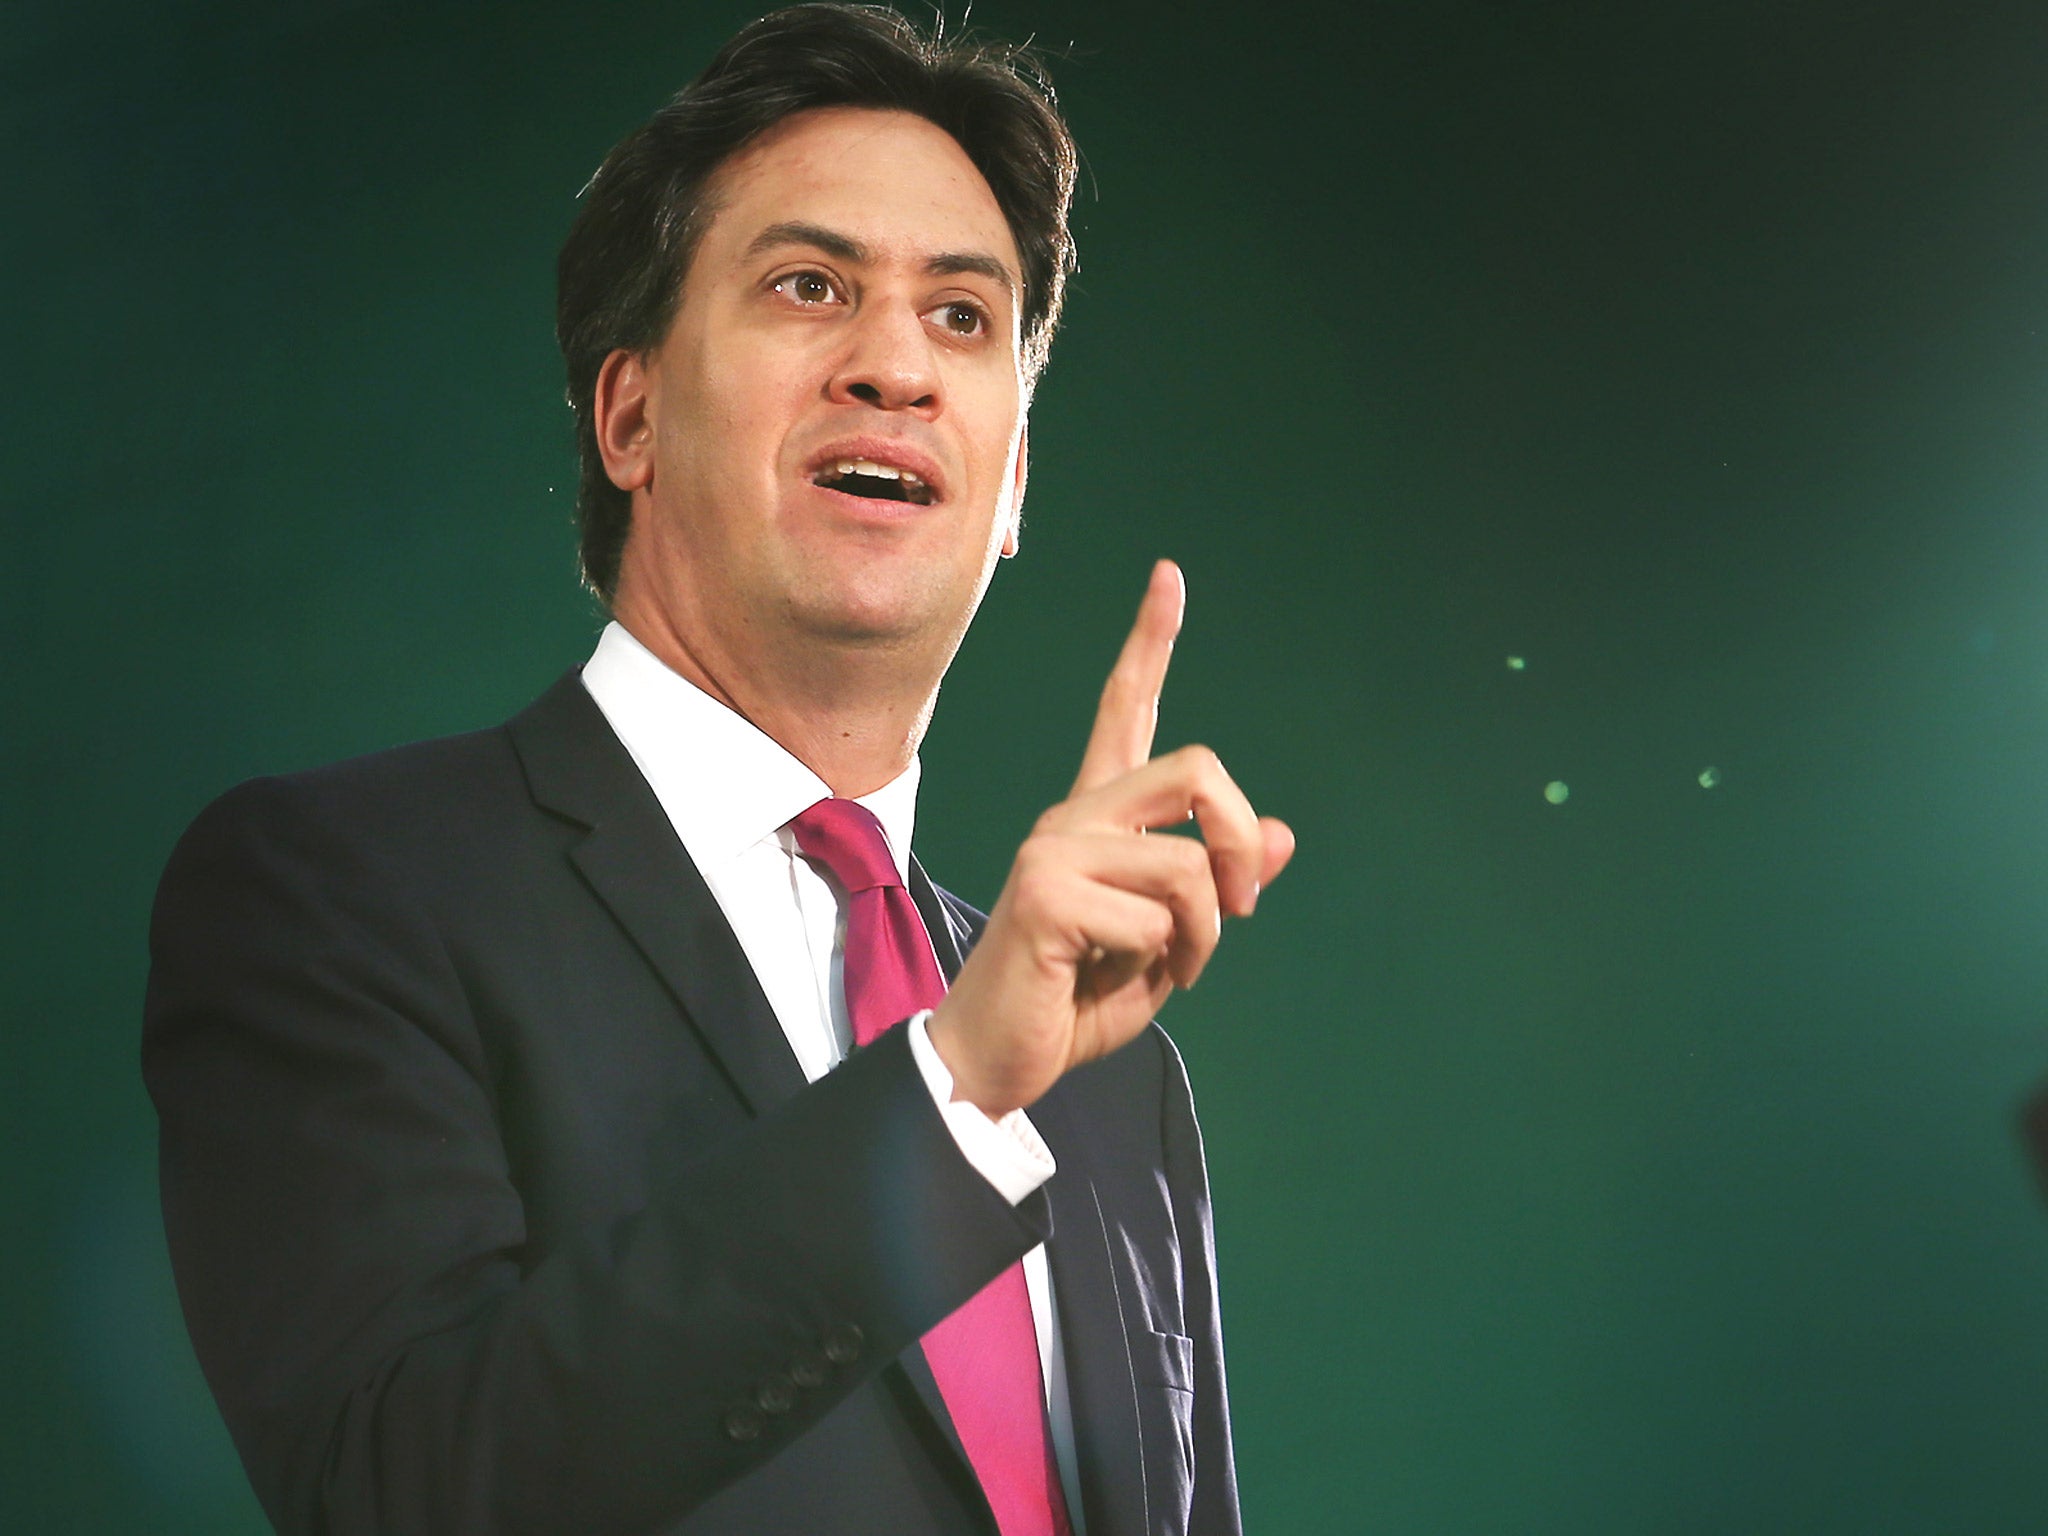 Ed Miliband said there was 'a danger' of housing in London becoming closed to ordinary families